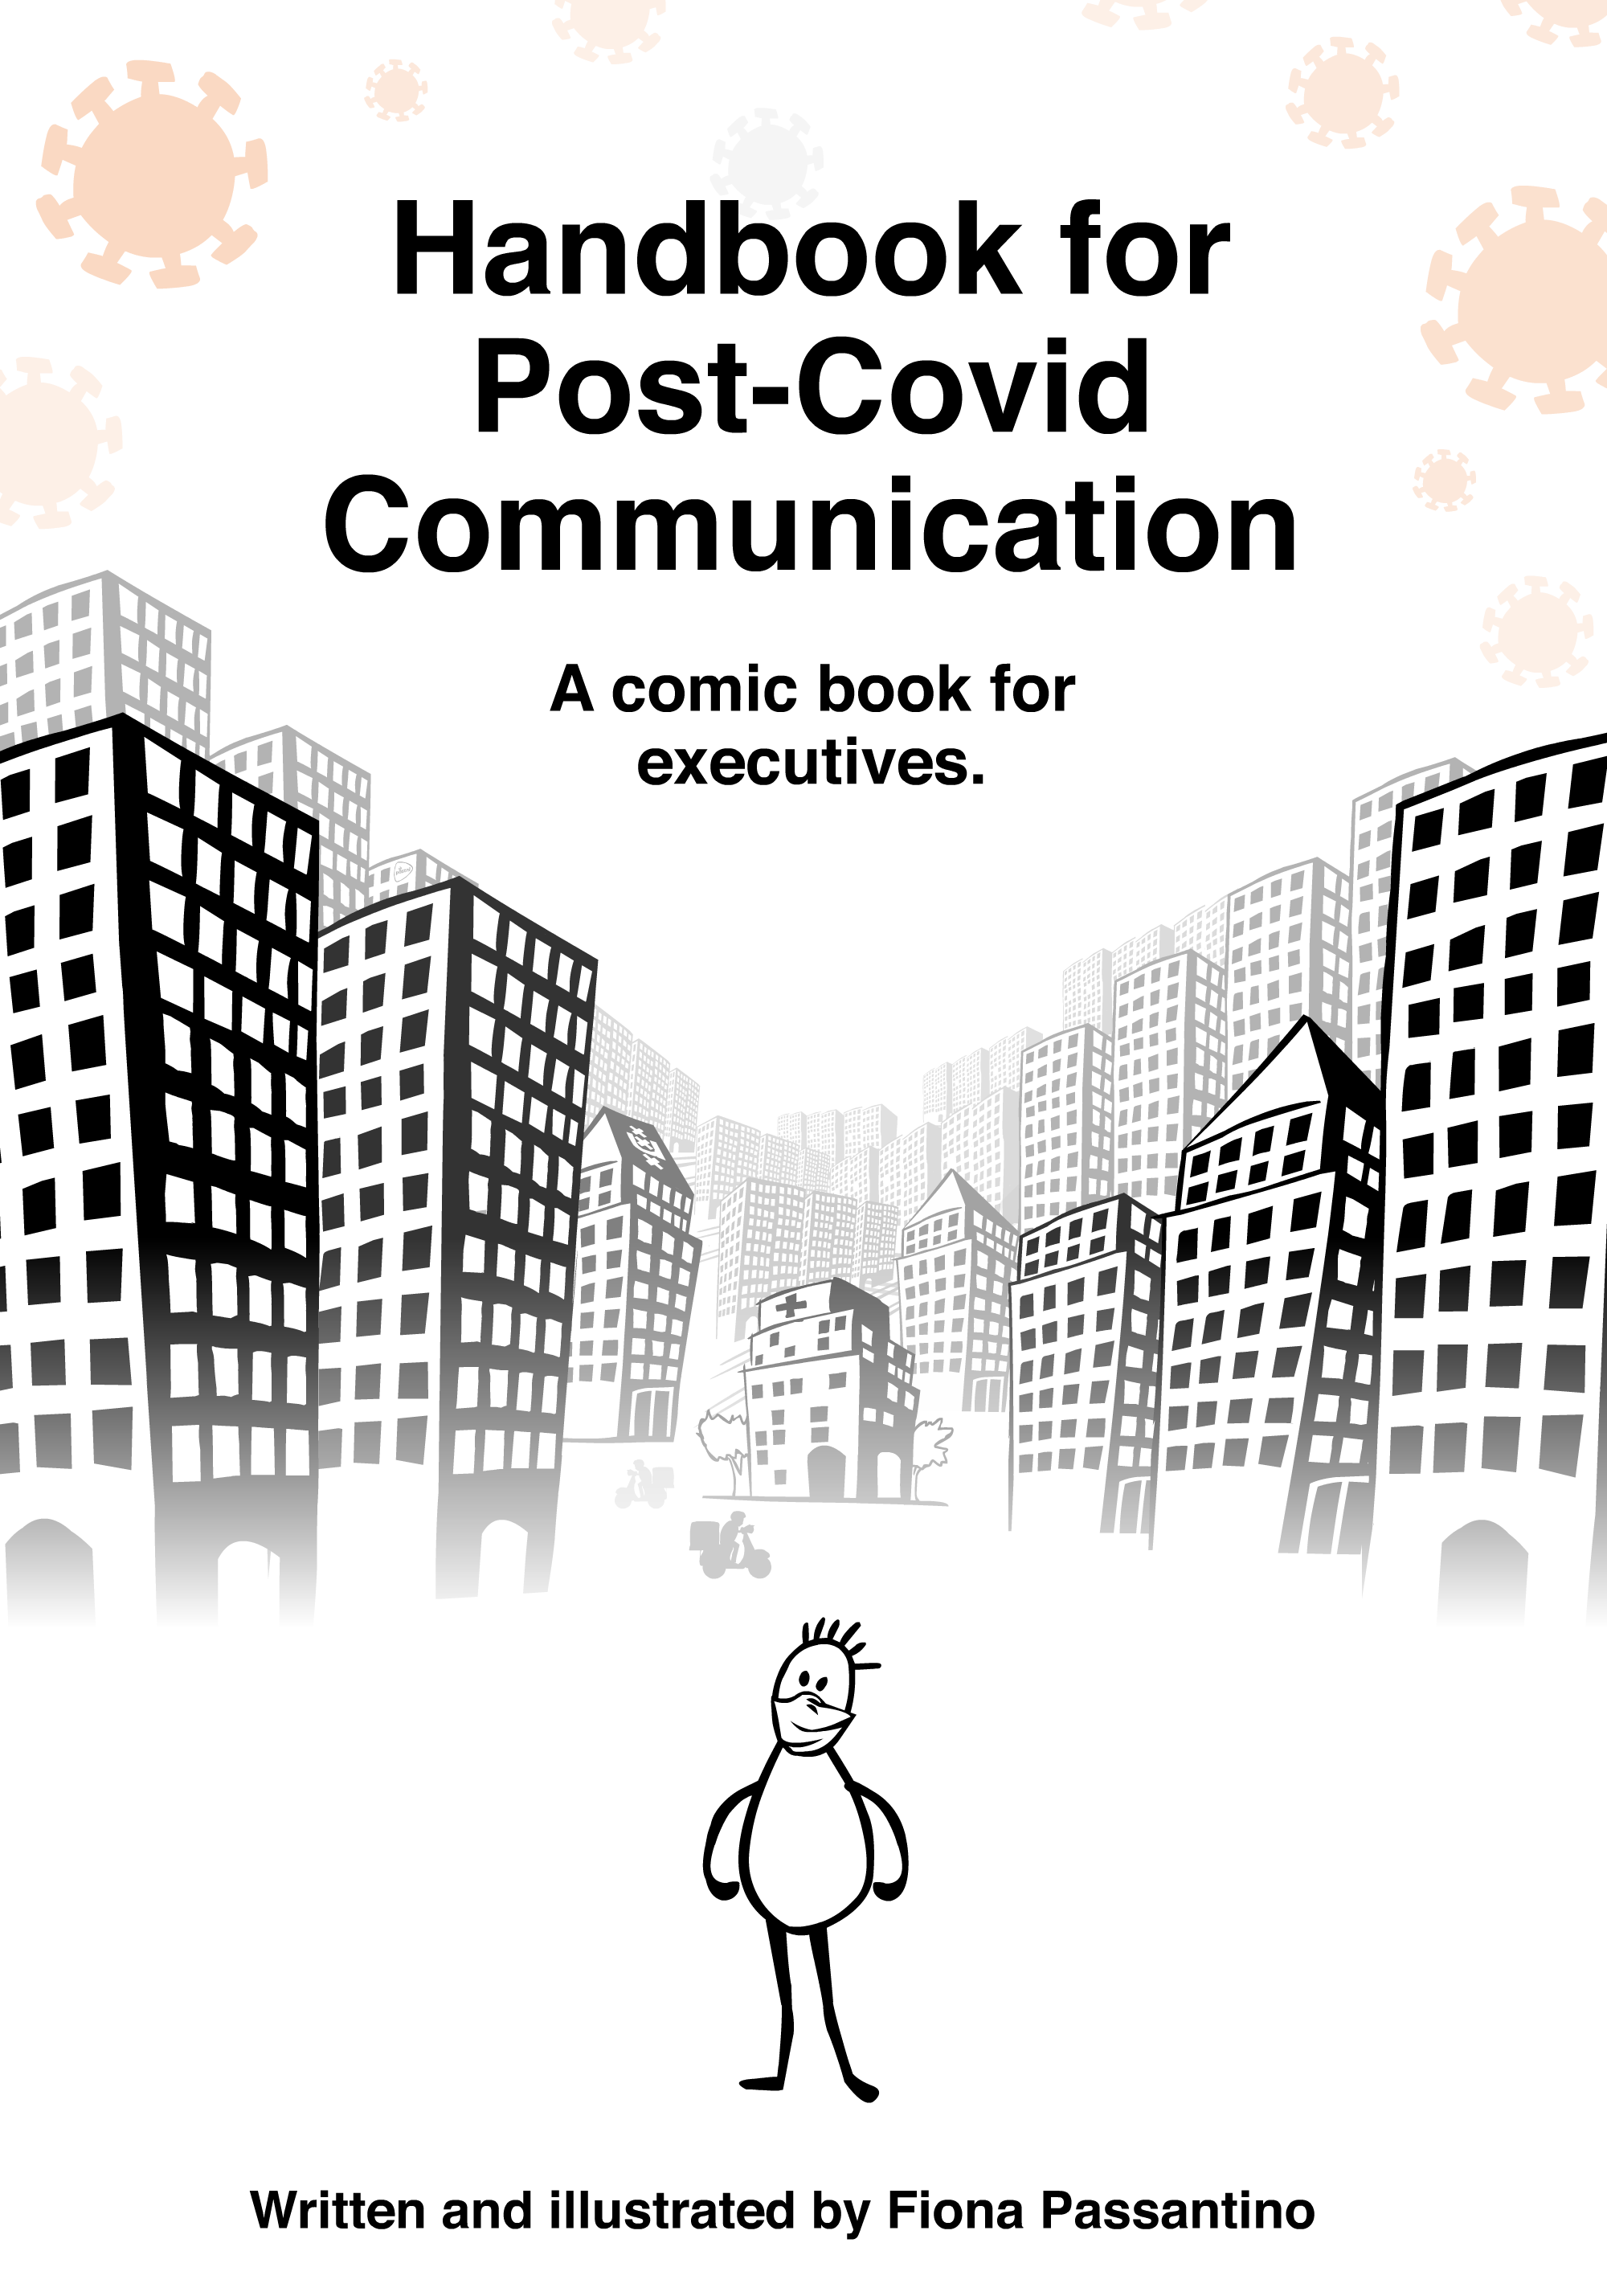 The Handbook for Post-Covid Communications: a Comic Book for Executives. Part graphic novel, part research-driven practical advice, designed to be read on a smartphone in less time than it takes to hear the results of your latest PCR test.